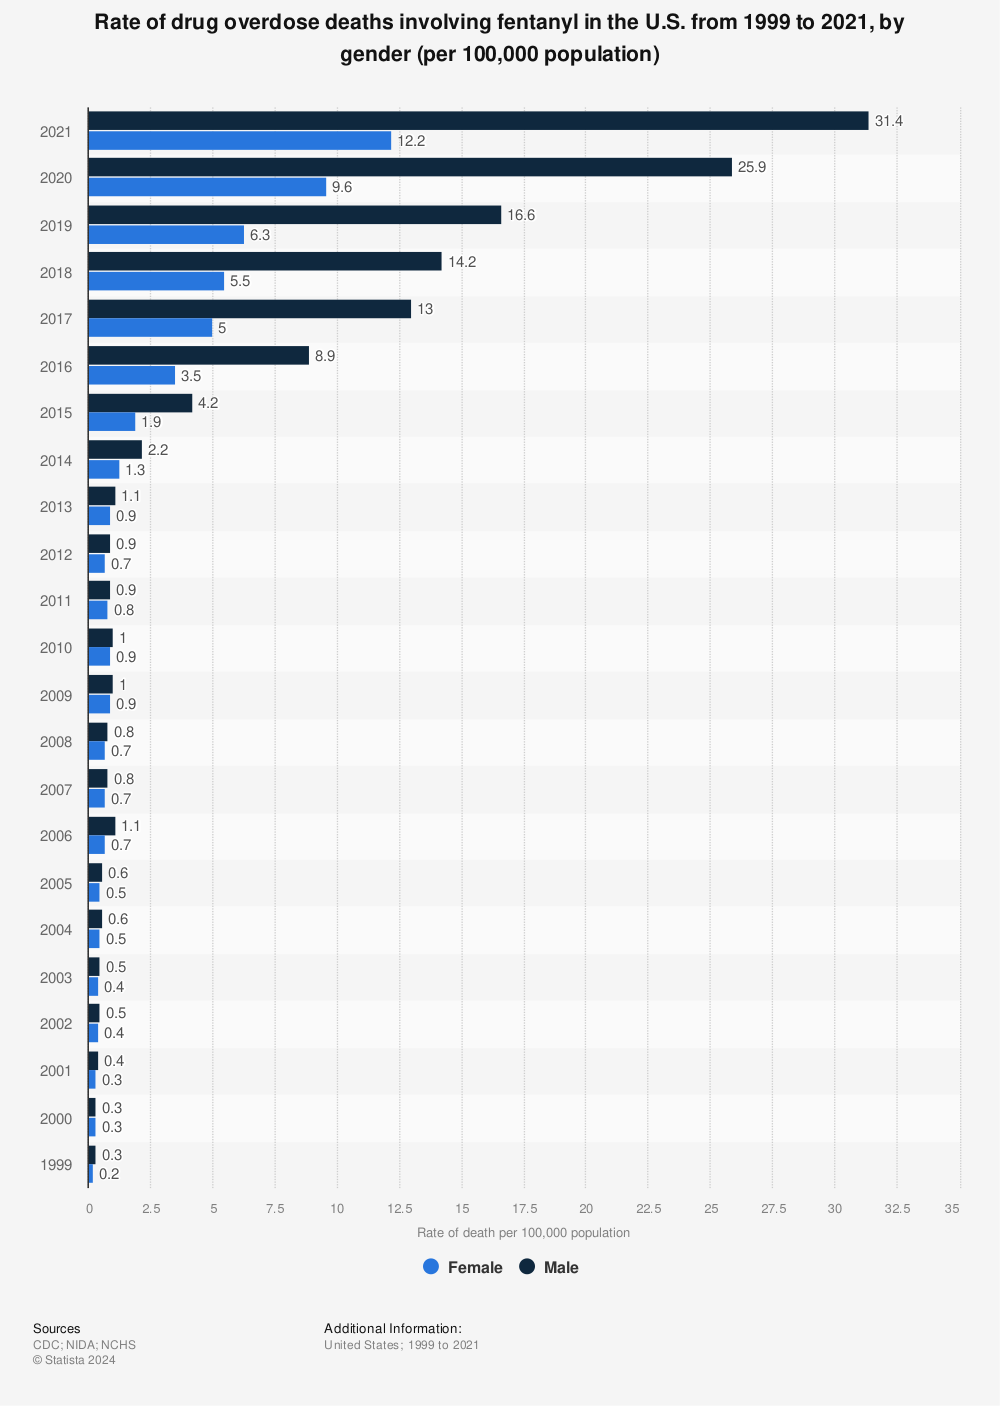 Statistic: Rate of drug overdose deaths involving fentanyl in the U.S. from 1999 to 2020, by gender (per 100,000 population) | Statista